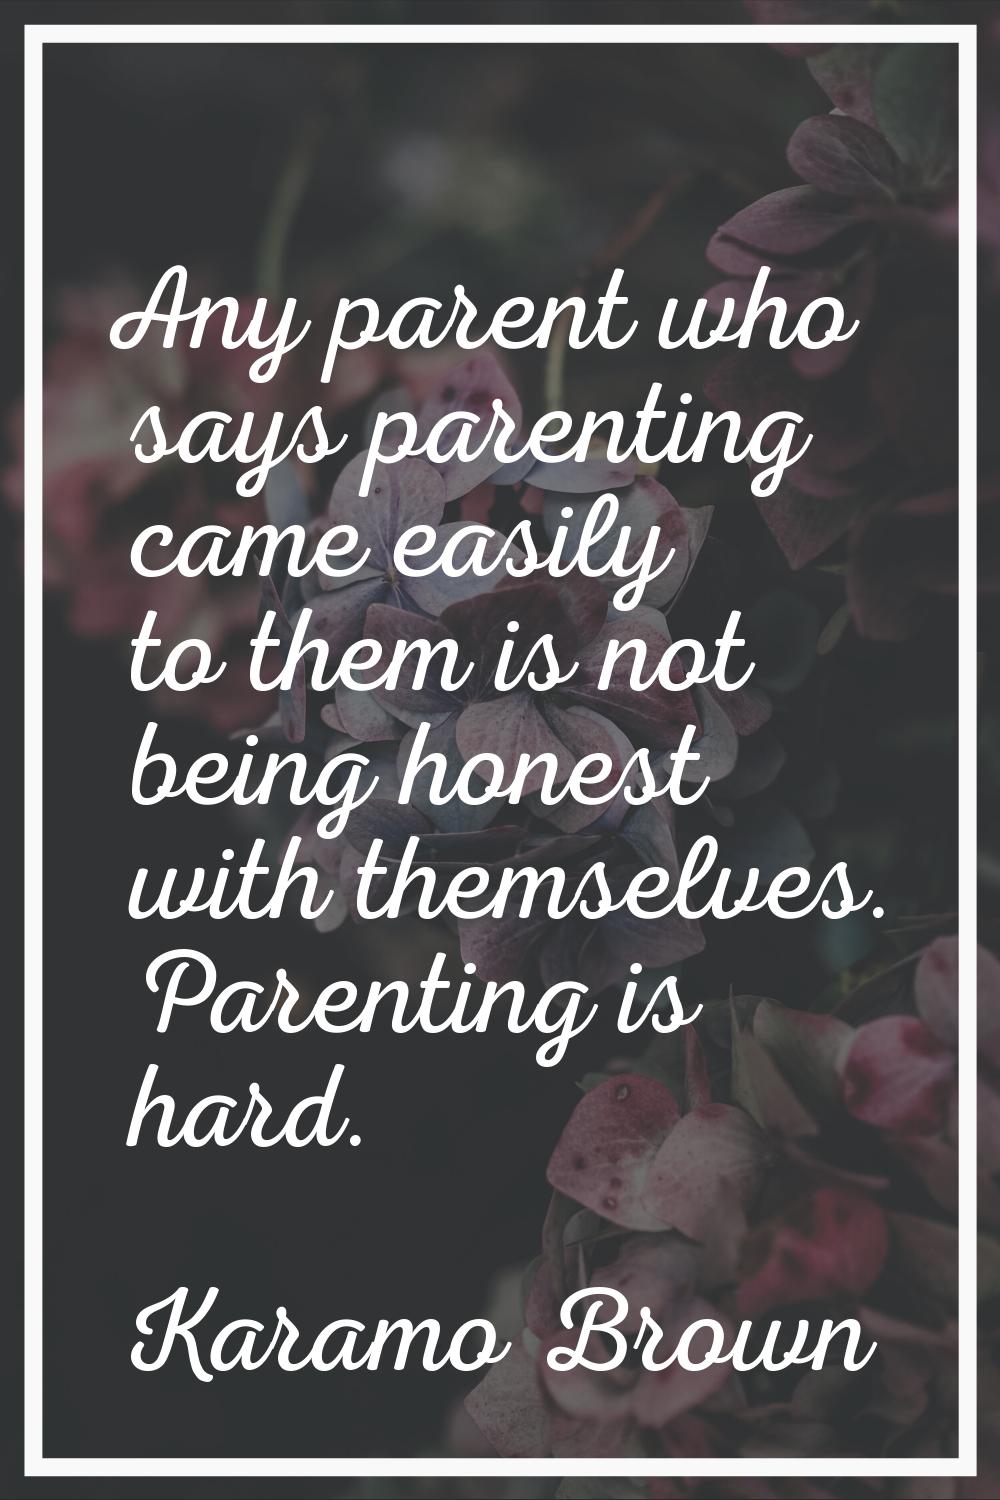 Any parent who says parenting came easily to them is not being honest with themselves. Parenting is